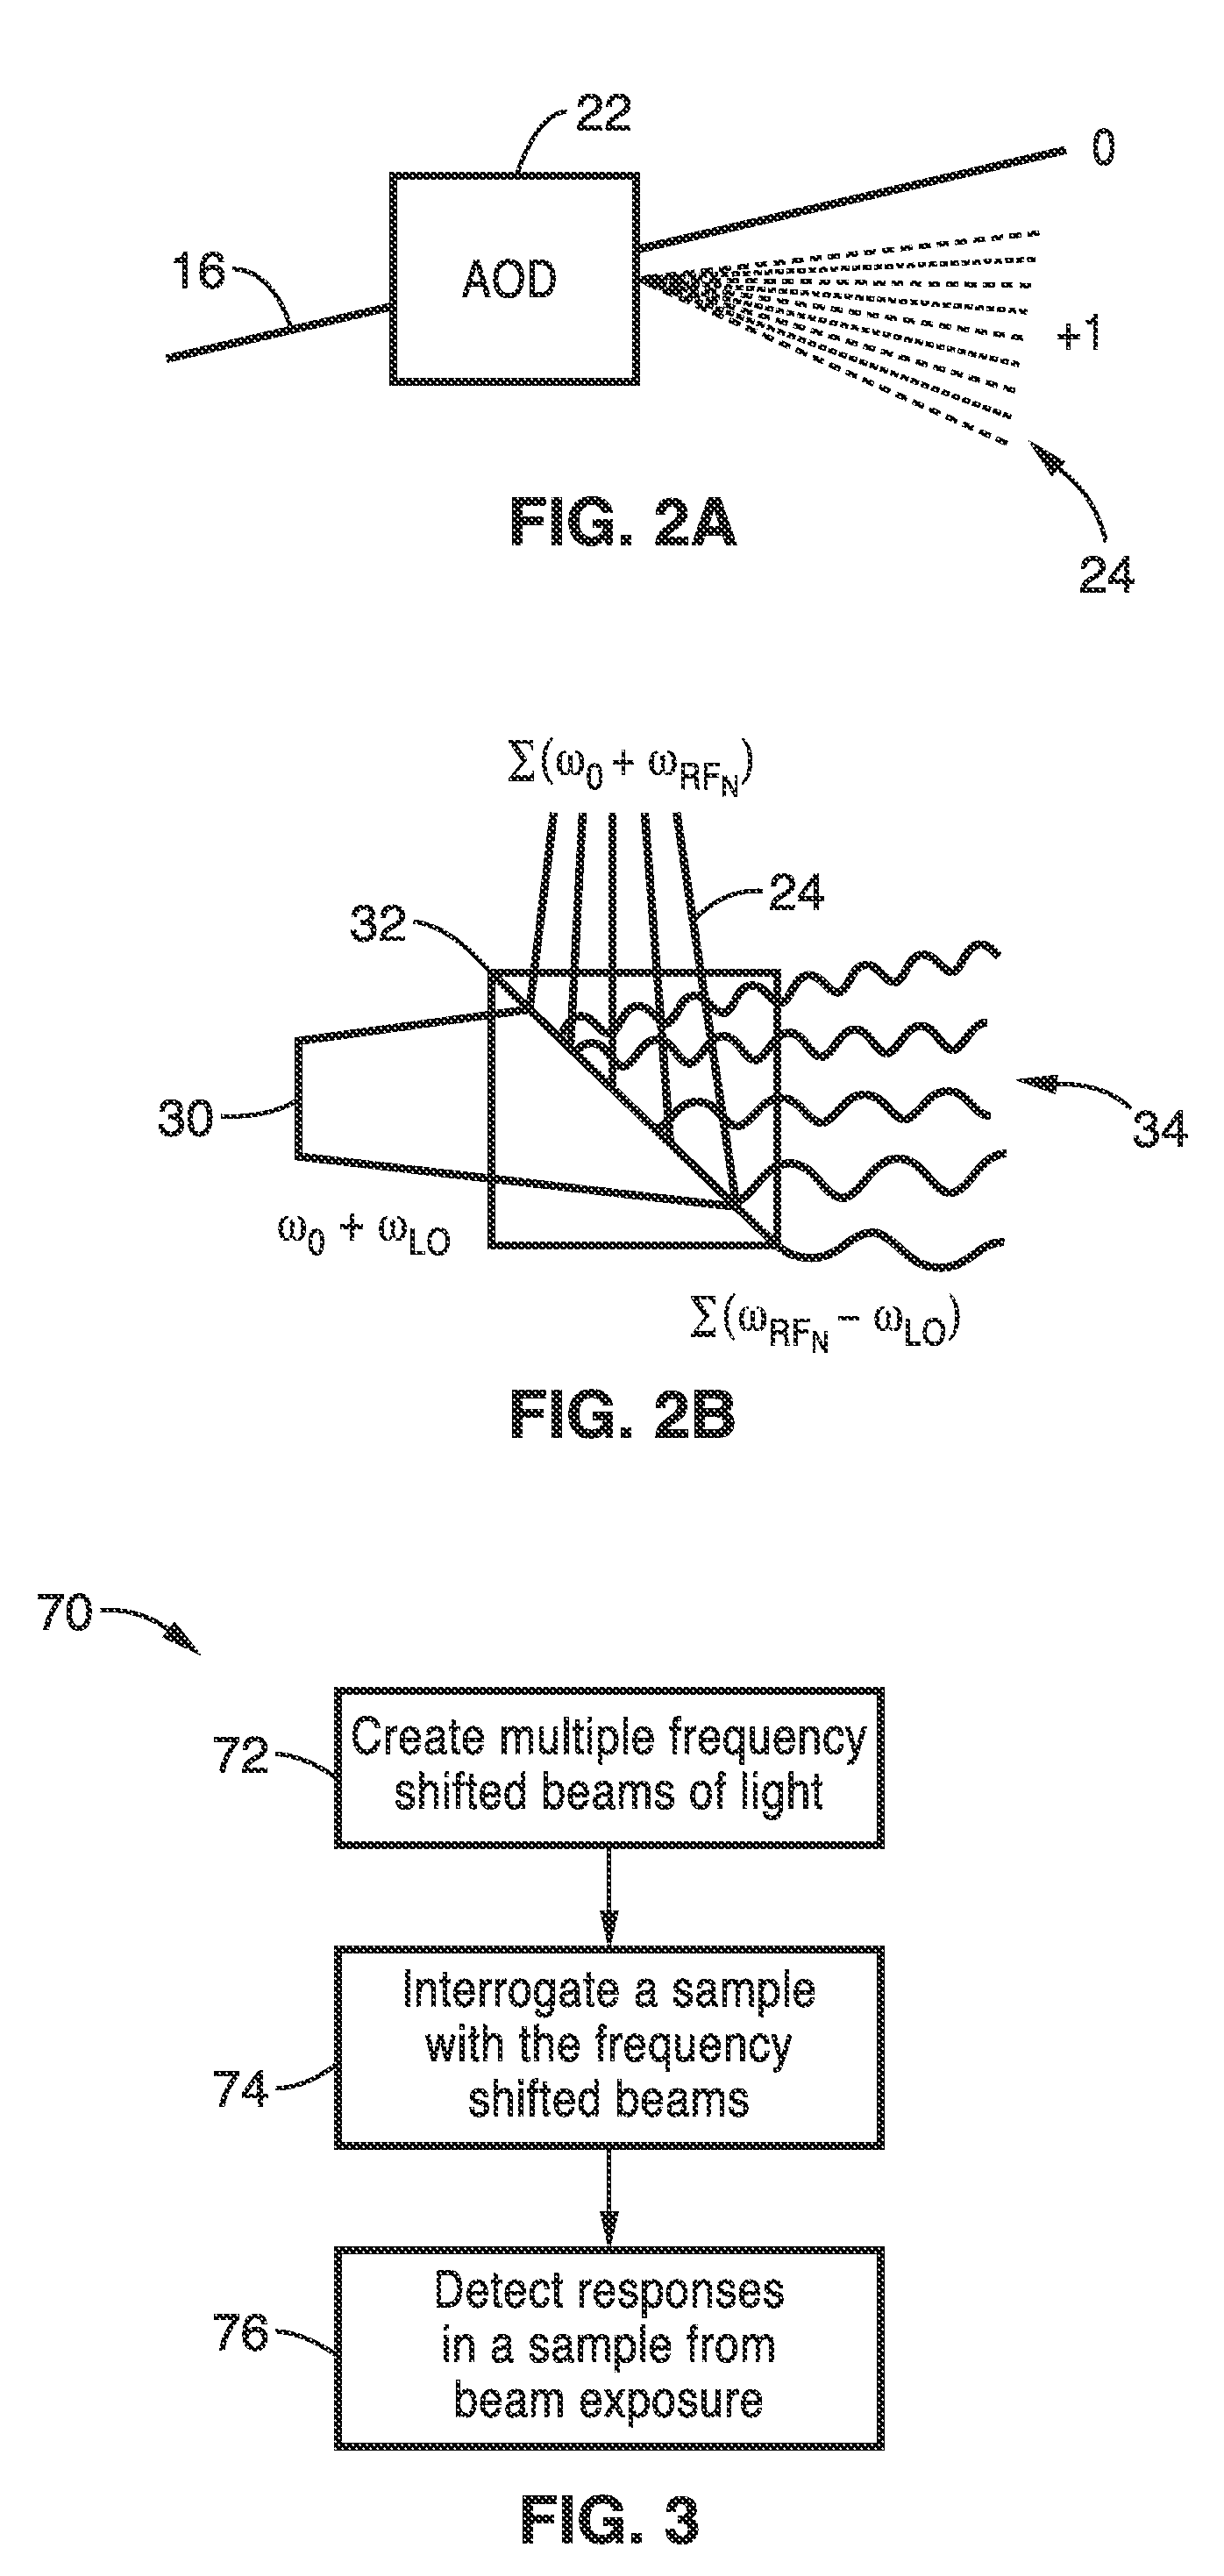 Apparatus and methods for fluorescence imaging using radiofrequency-multiplexed excitation